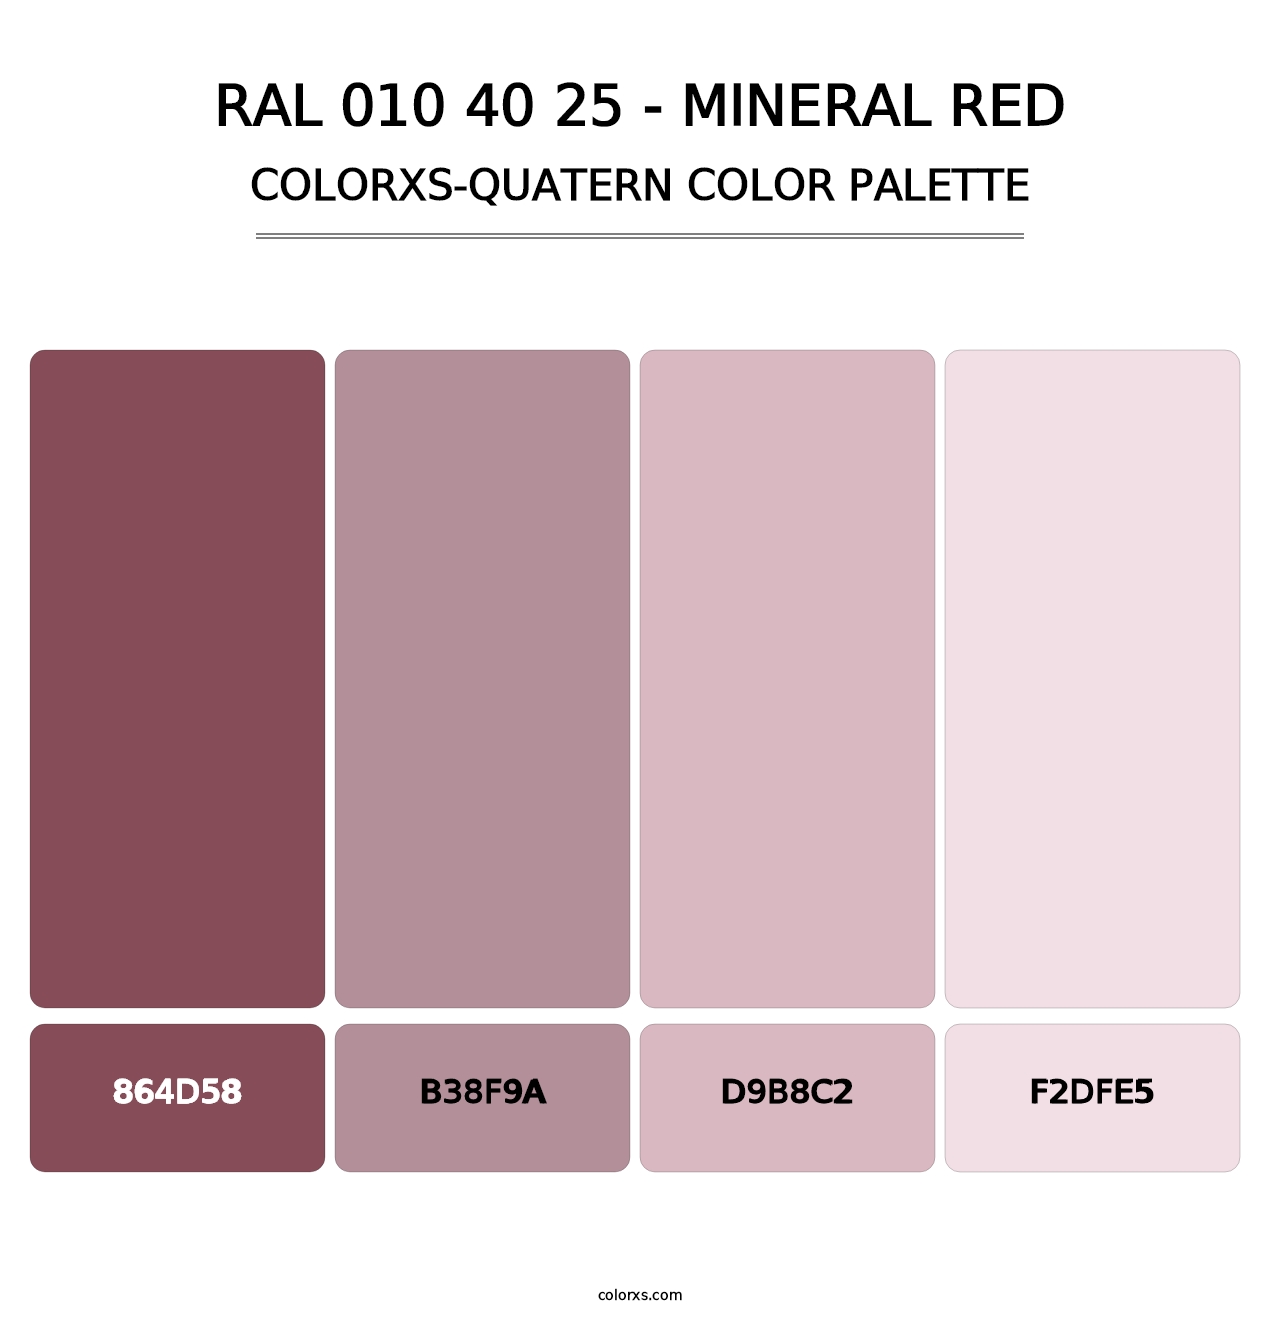 RAL 010 40 25 - Mineral Red - Colorxs Quatern Palette